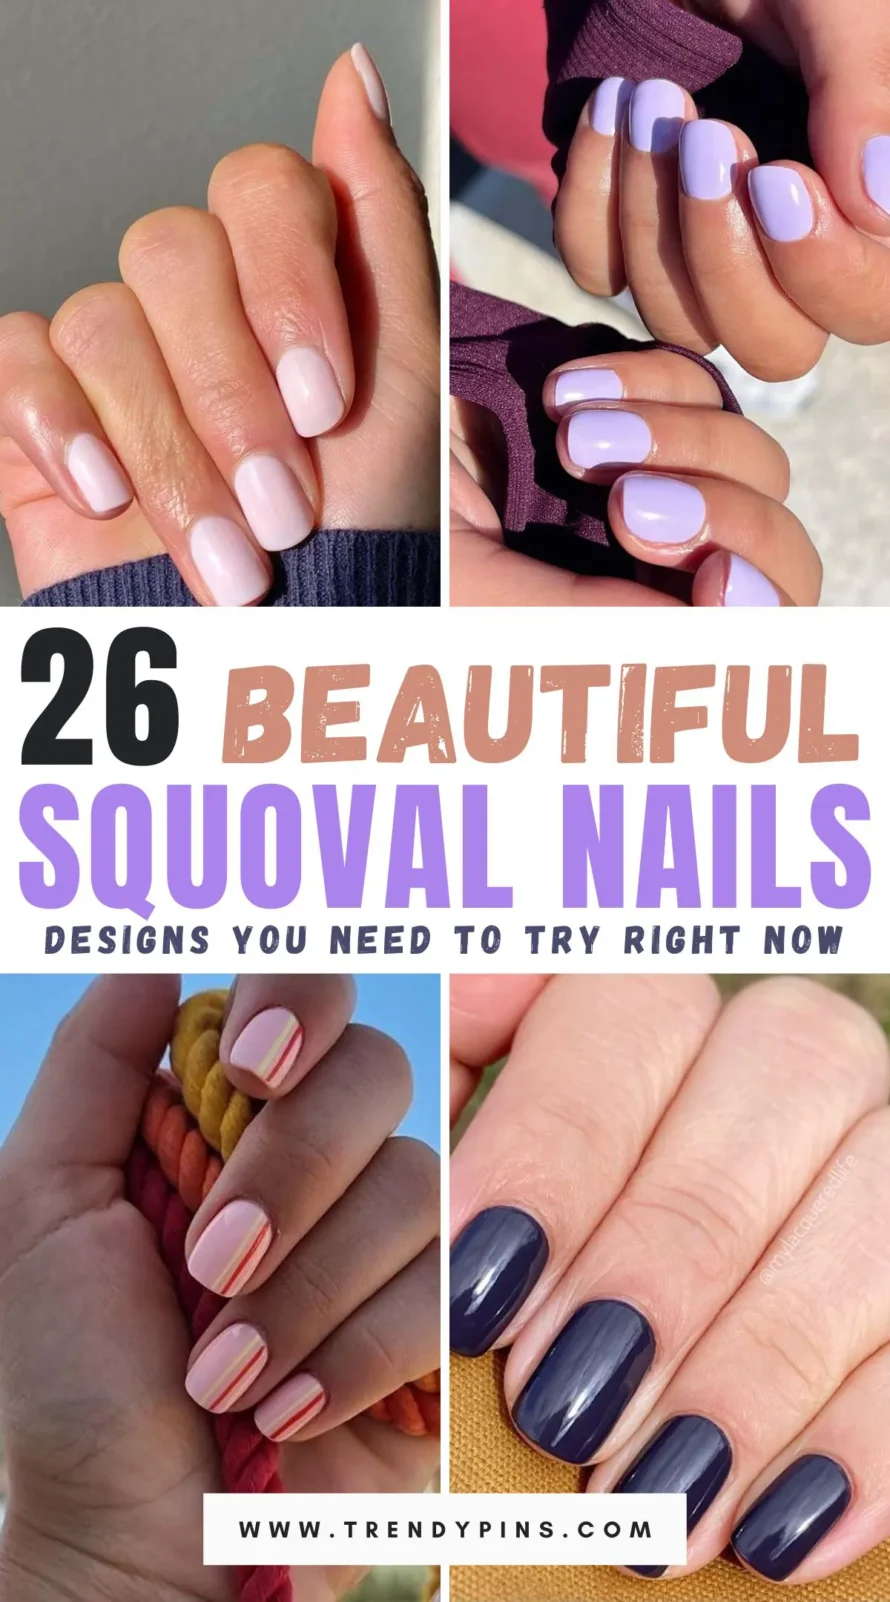 Explore 26 chic squoval nail designs to elevate your next manicure look. Perfect inspiration for a trendy update!